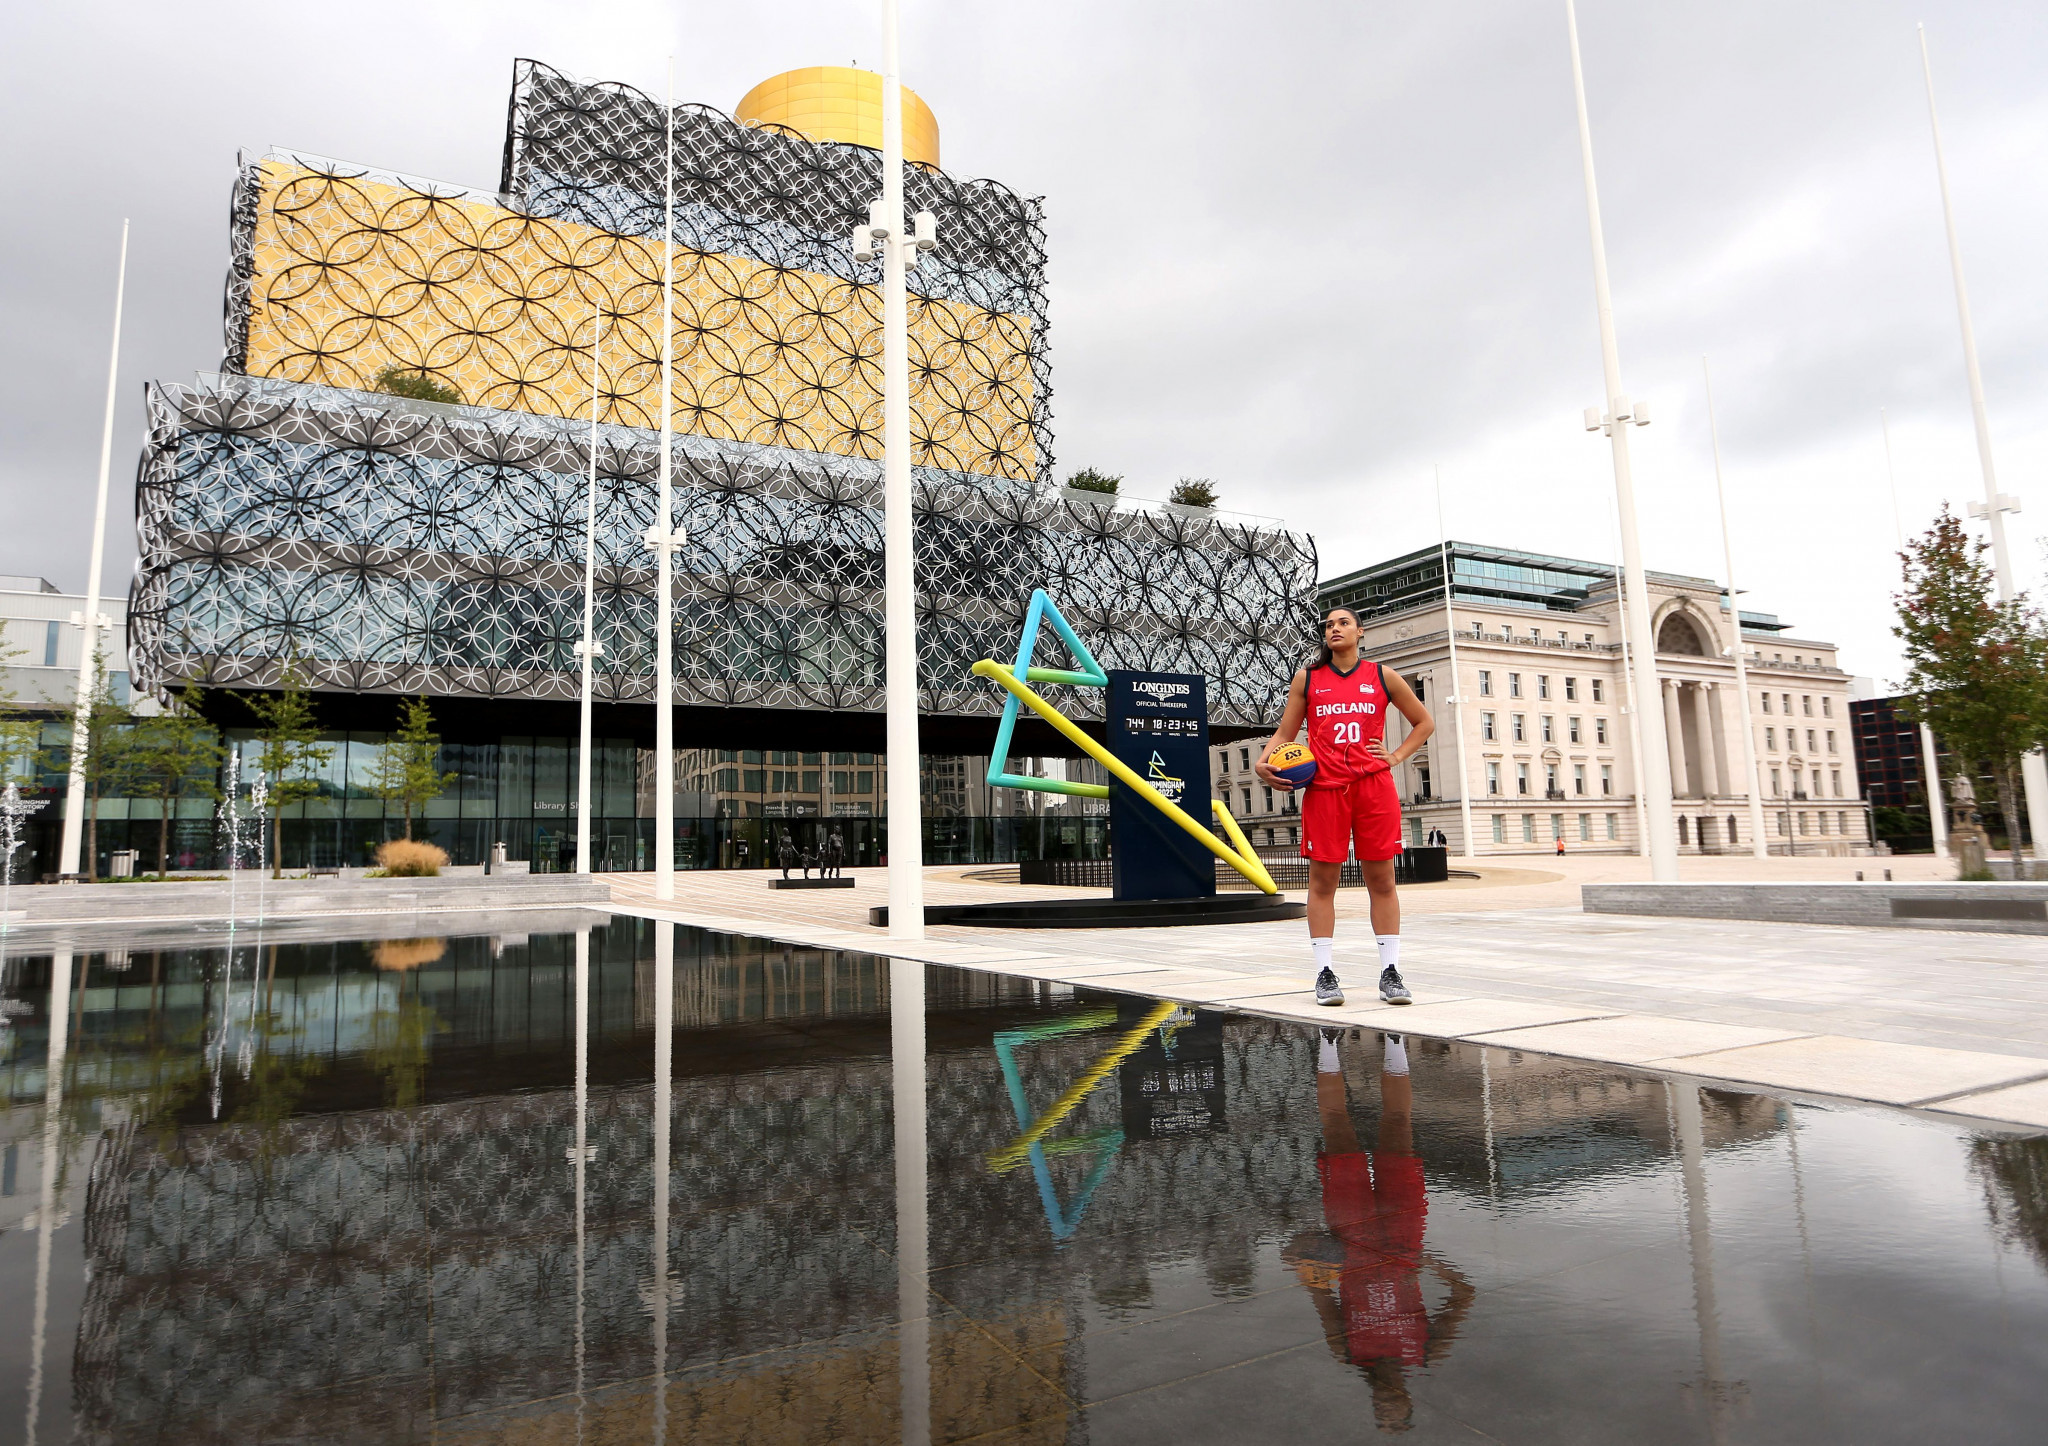 Birmingham is set to be the third British city to host the Commonwealth Games in the 21st century after Manchester and Glasgow ©Getty Images